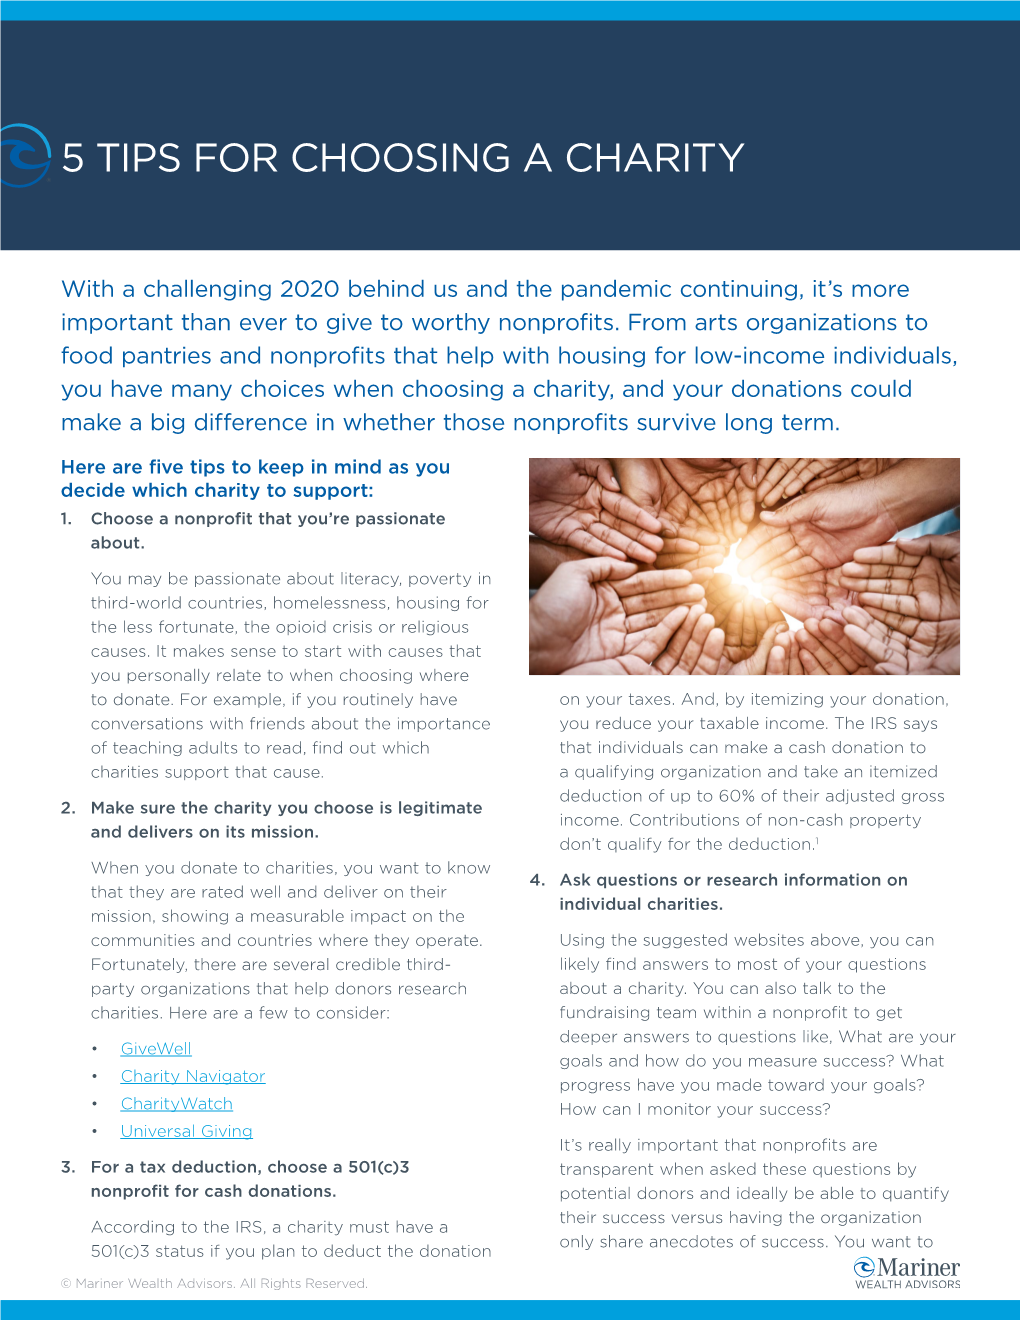 5 Tips for Choosing a Charity